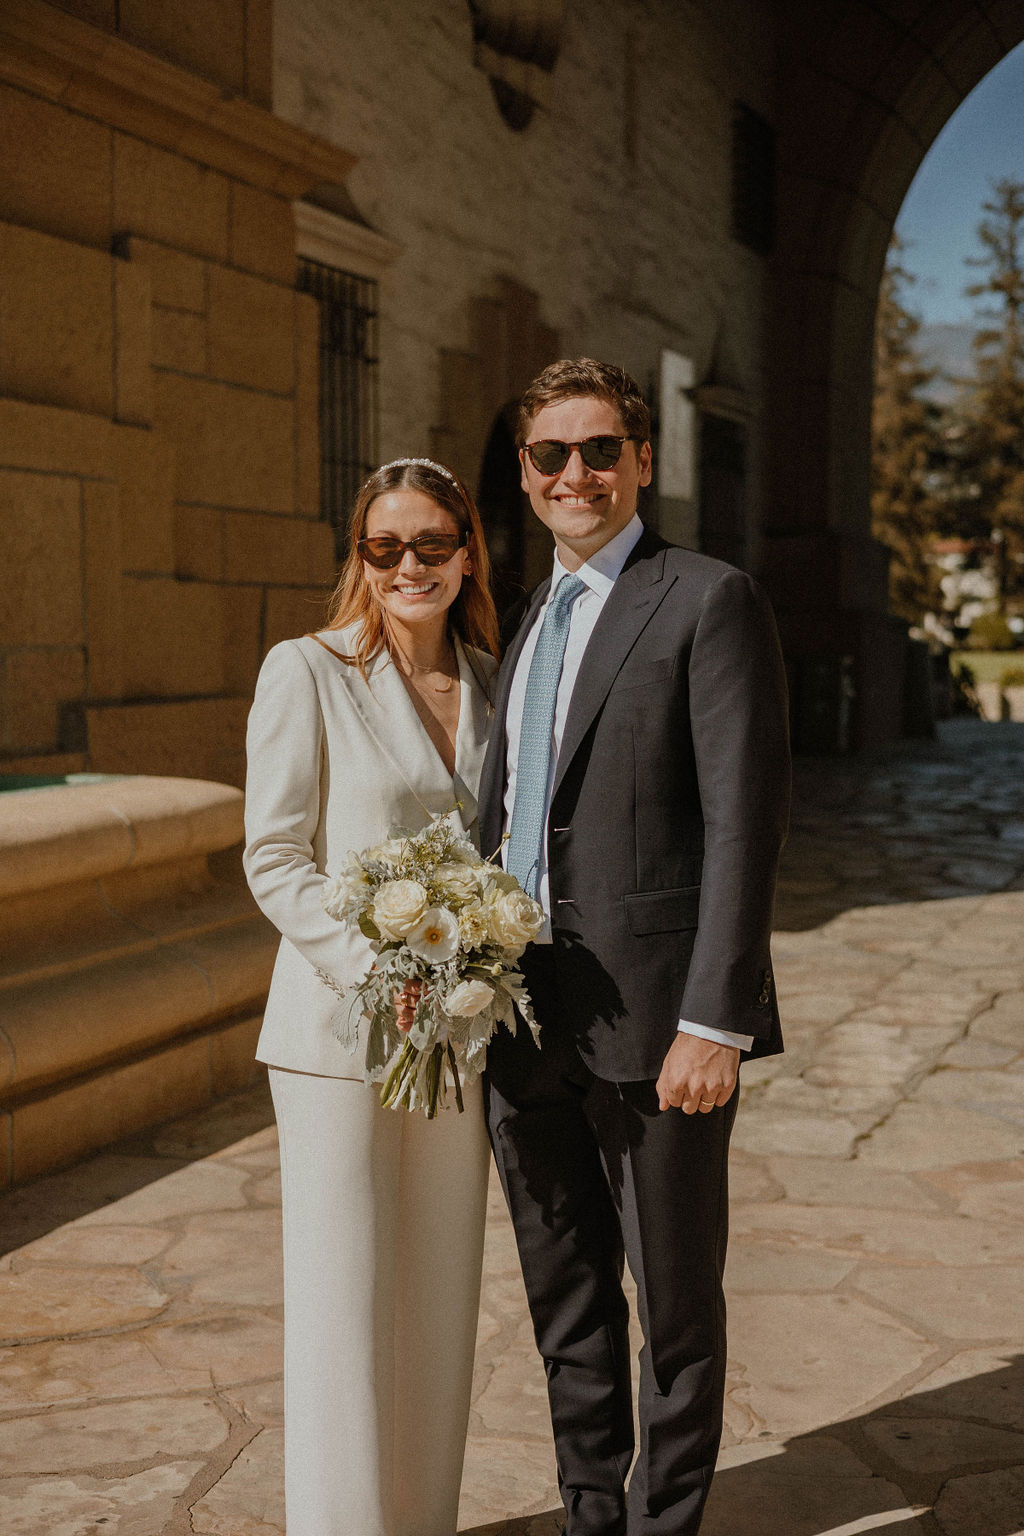 the couple grinning with their sunglasses on